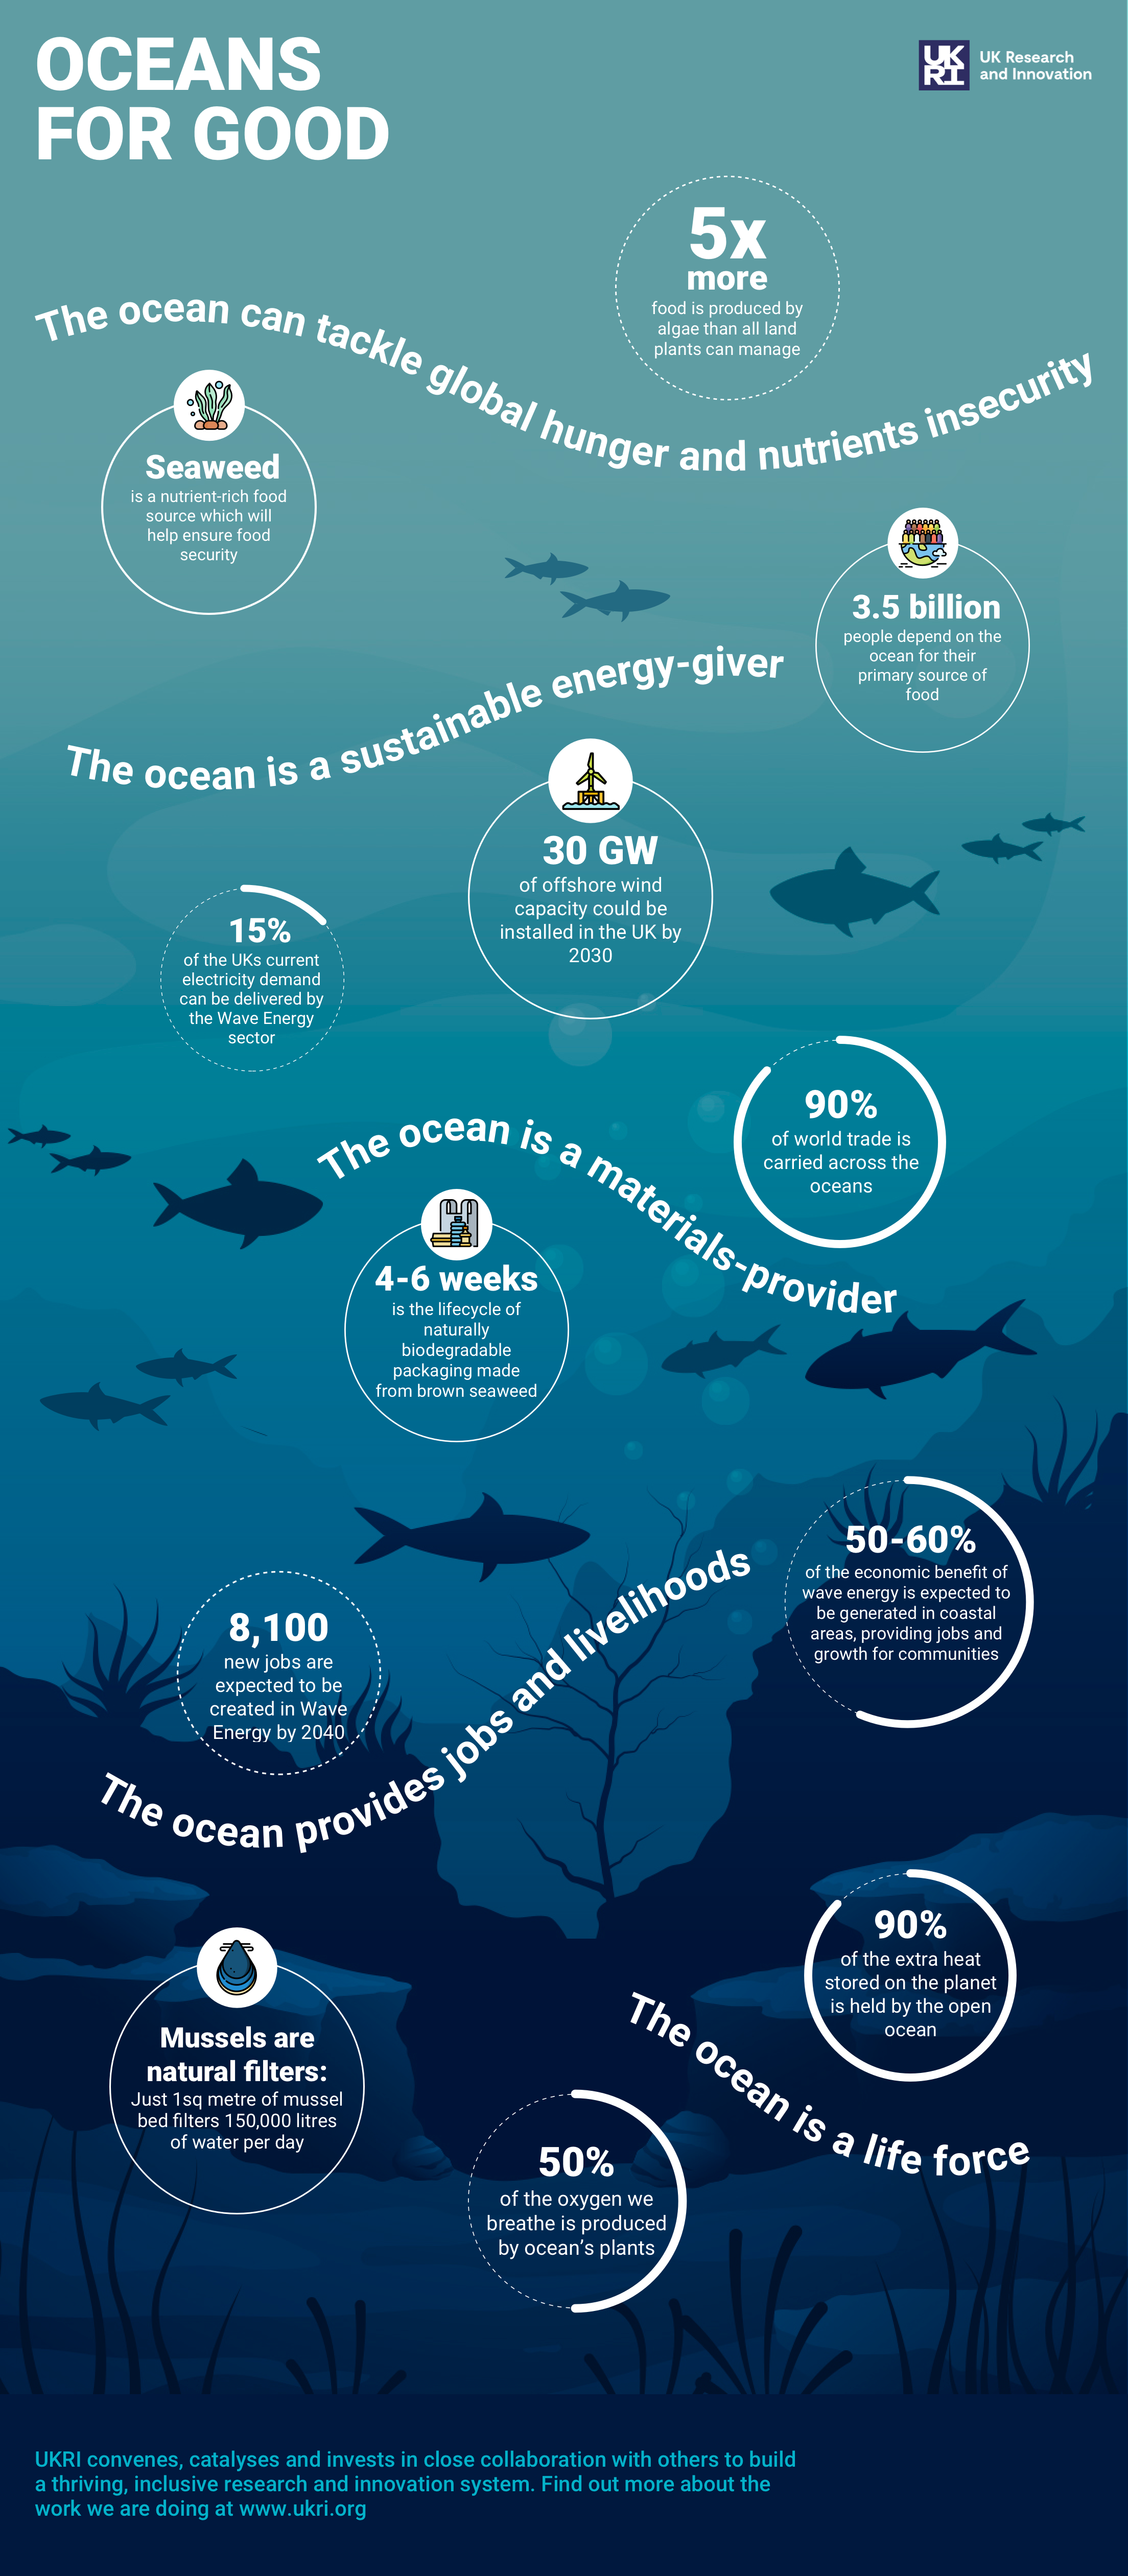 Oceans for good infographic